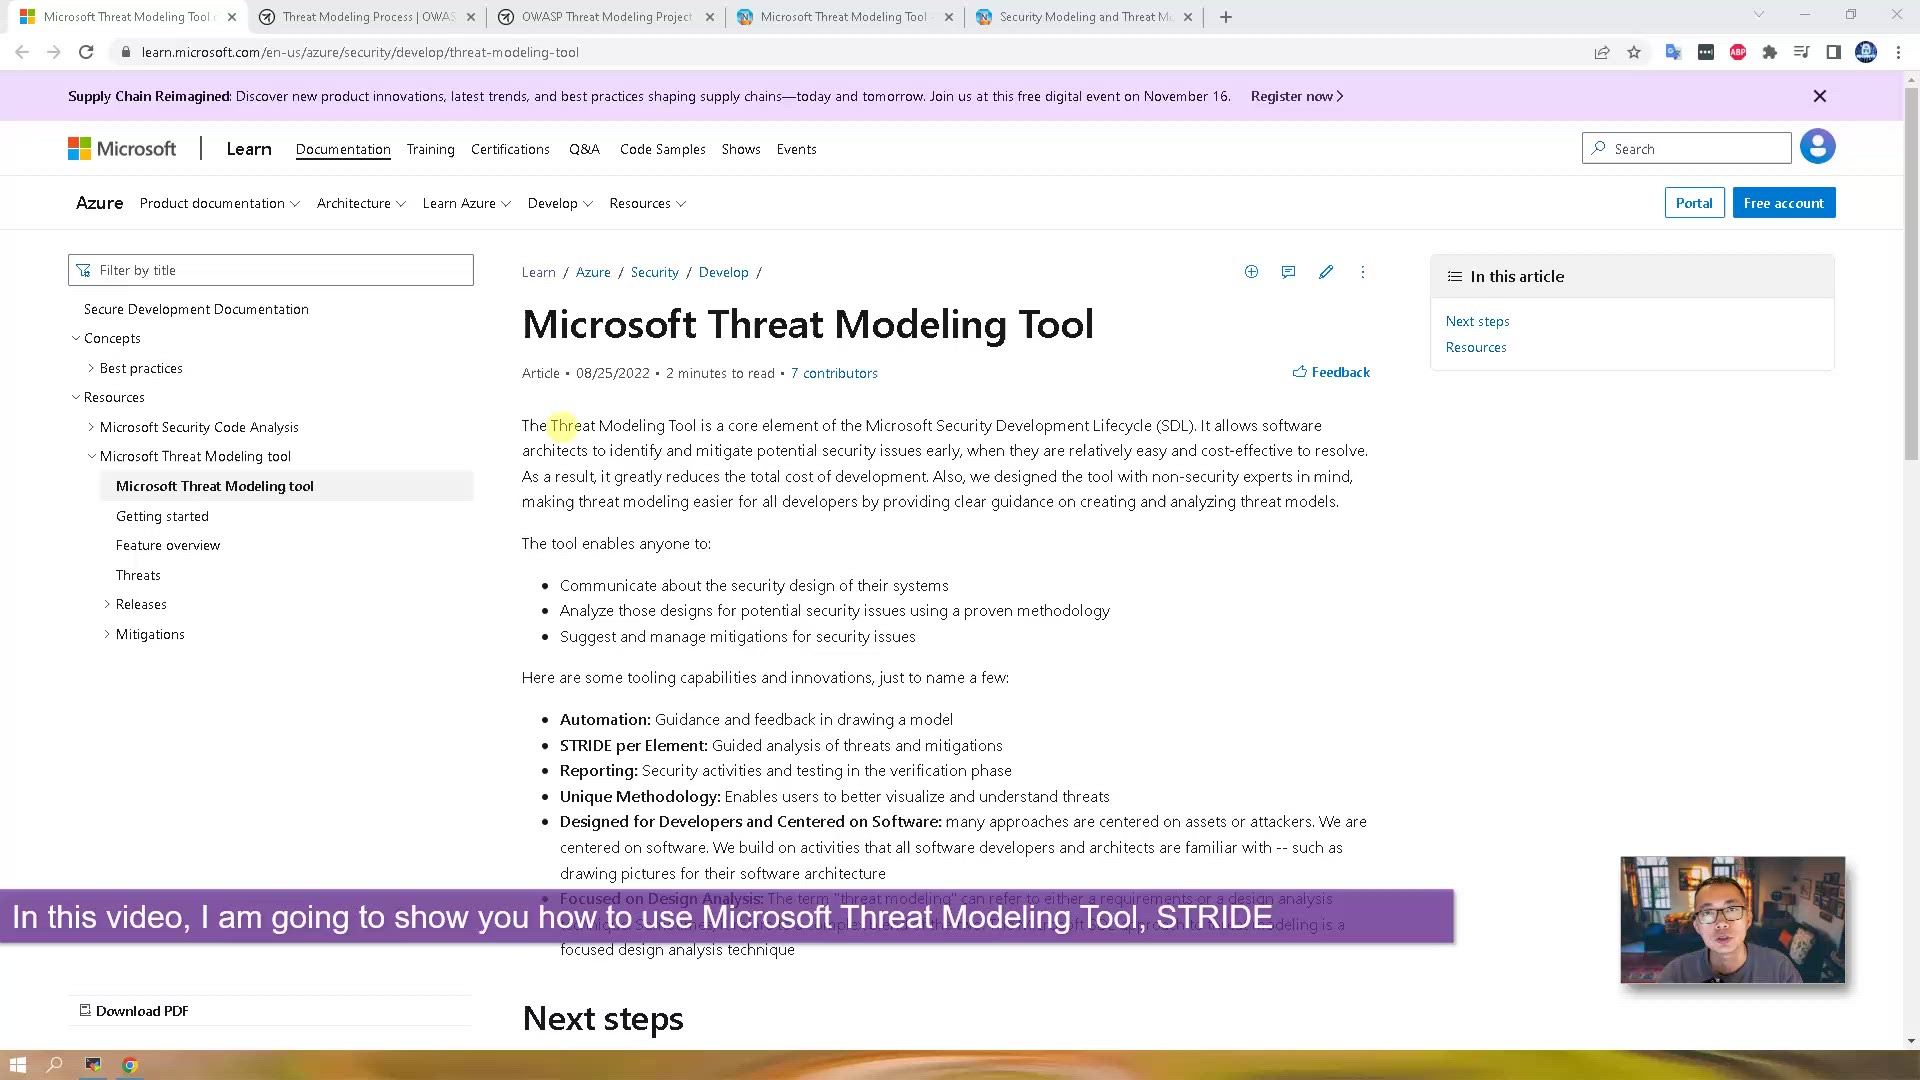 Microsoft Threat Modeling Tool feature overview - Azure